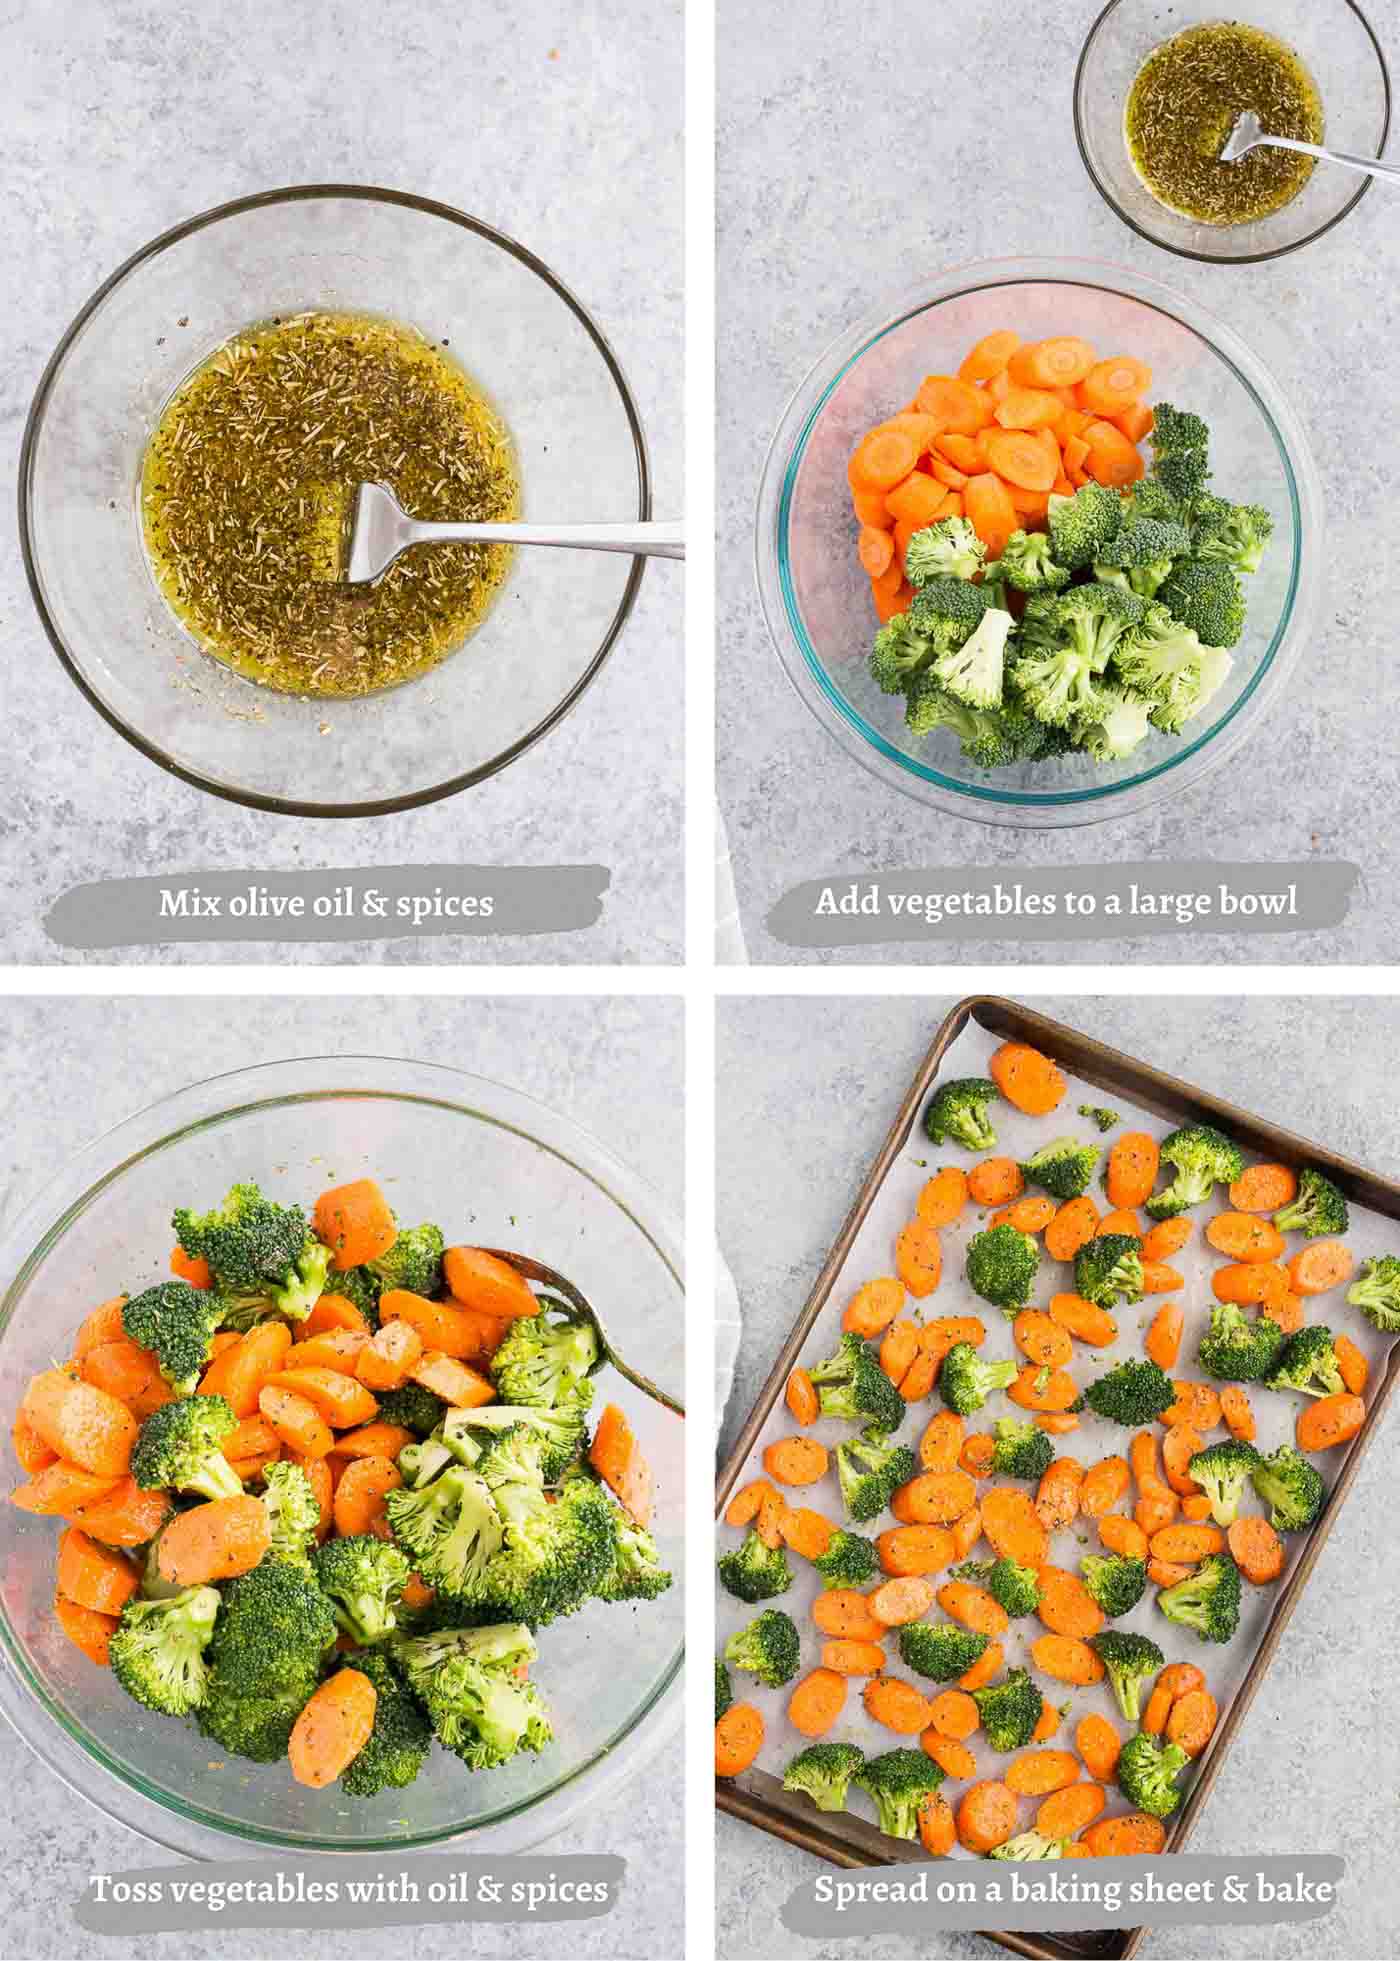 process images of making carrots and broccoli in the oven